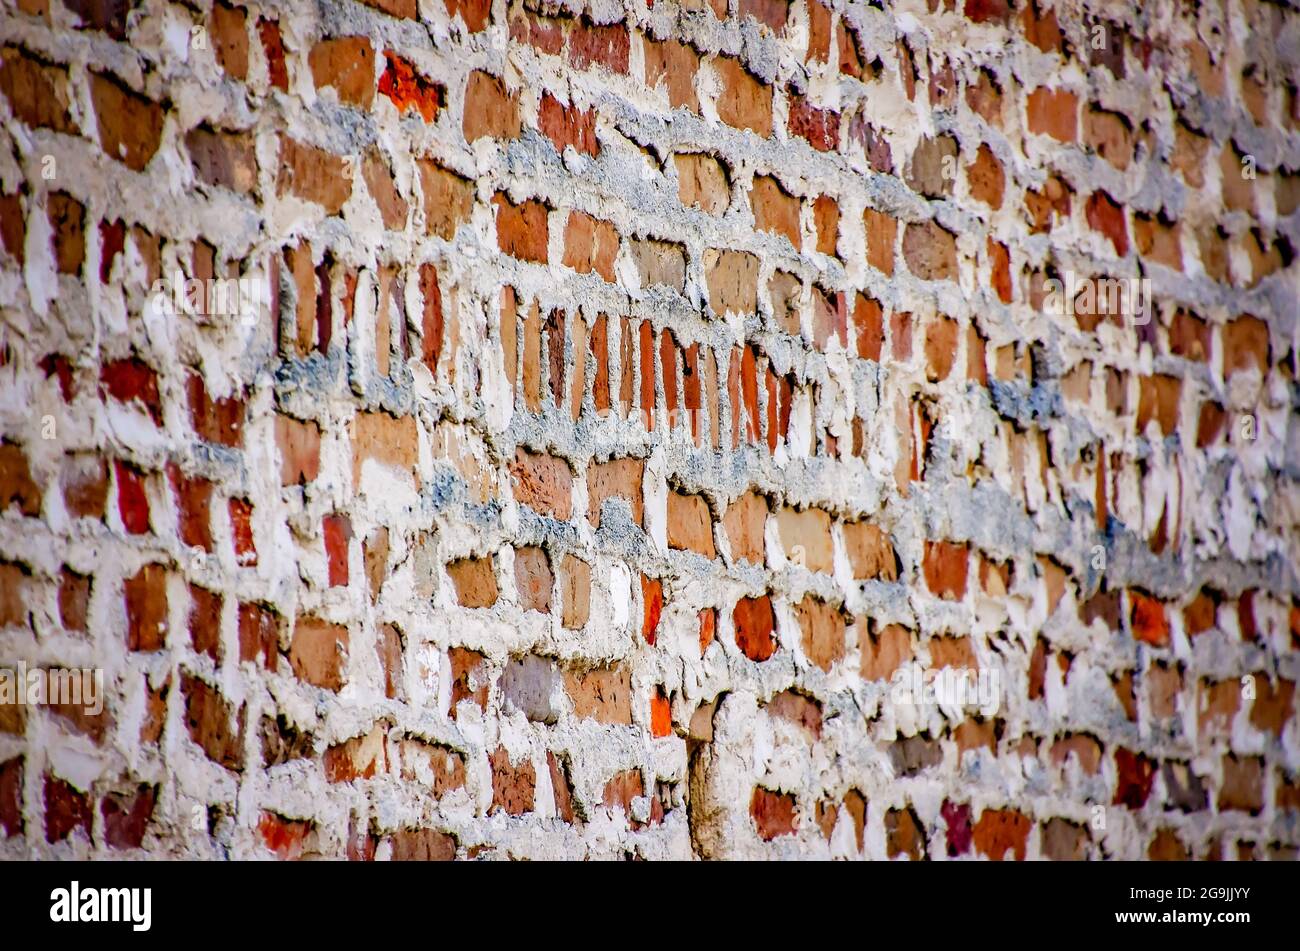 A historic brick wall shows messy mortar, also called weeping mortar, on July 23, 2021, in Mobile, Alabama. Stock Photo